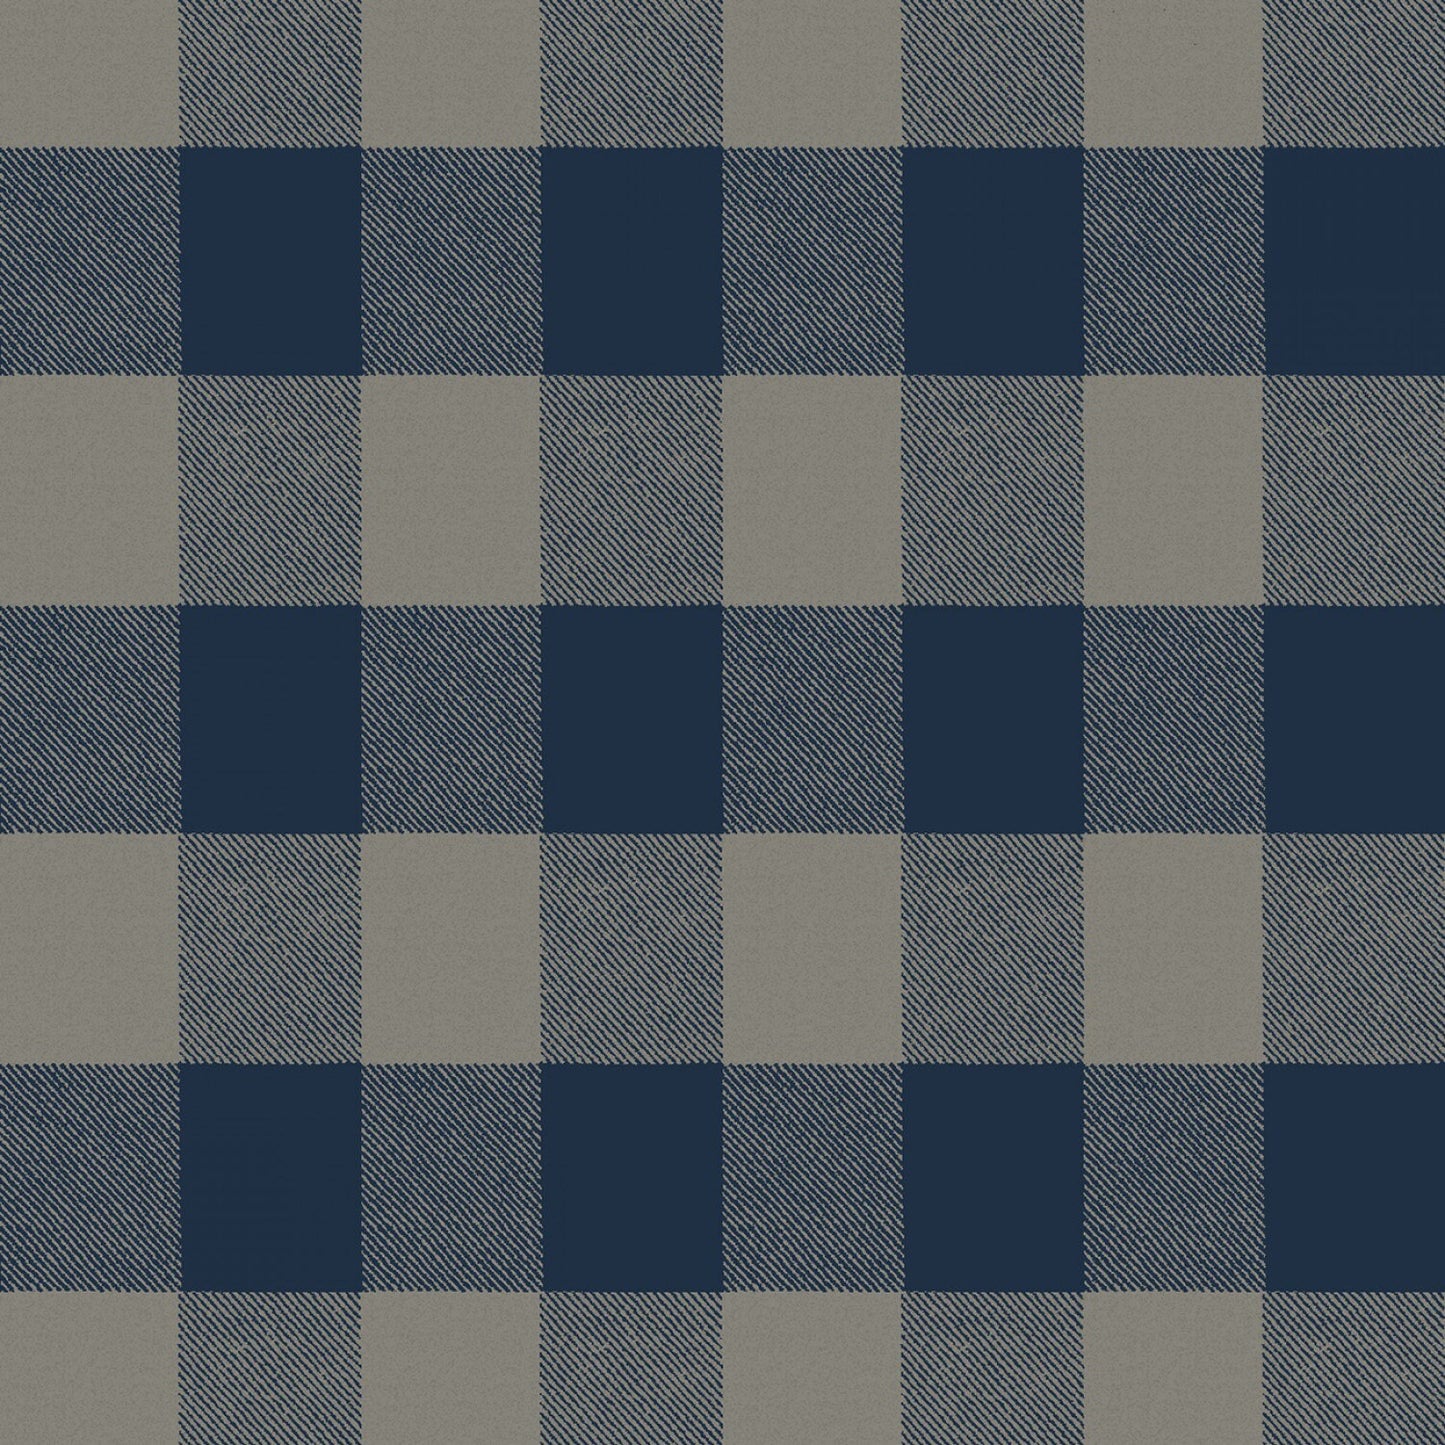 Winter Playground by Dan DiPaolo Denim Winter Playground Buffalo Plaid Y2768-89 Cotton Woven Fabric